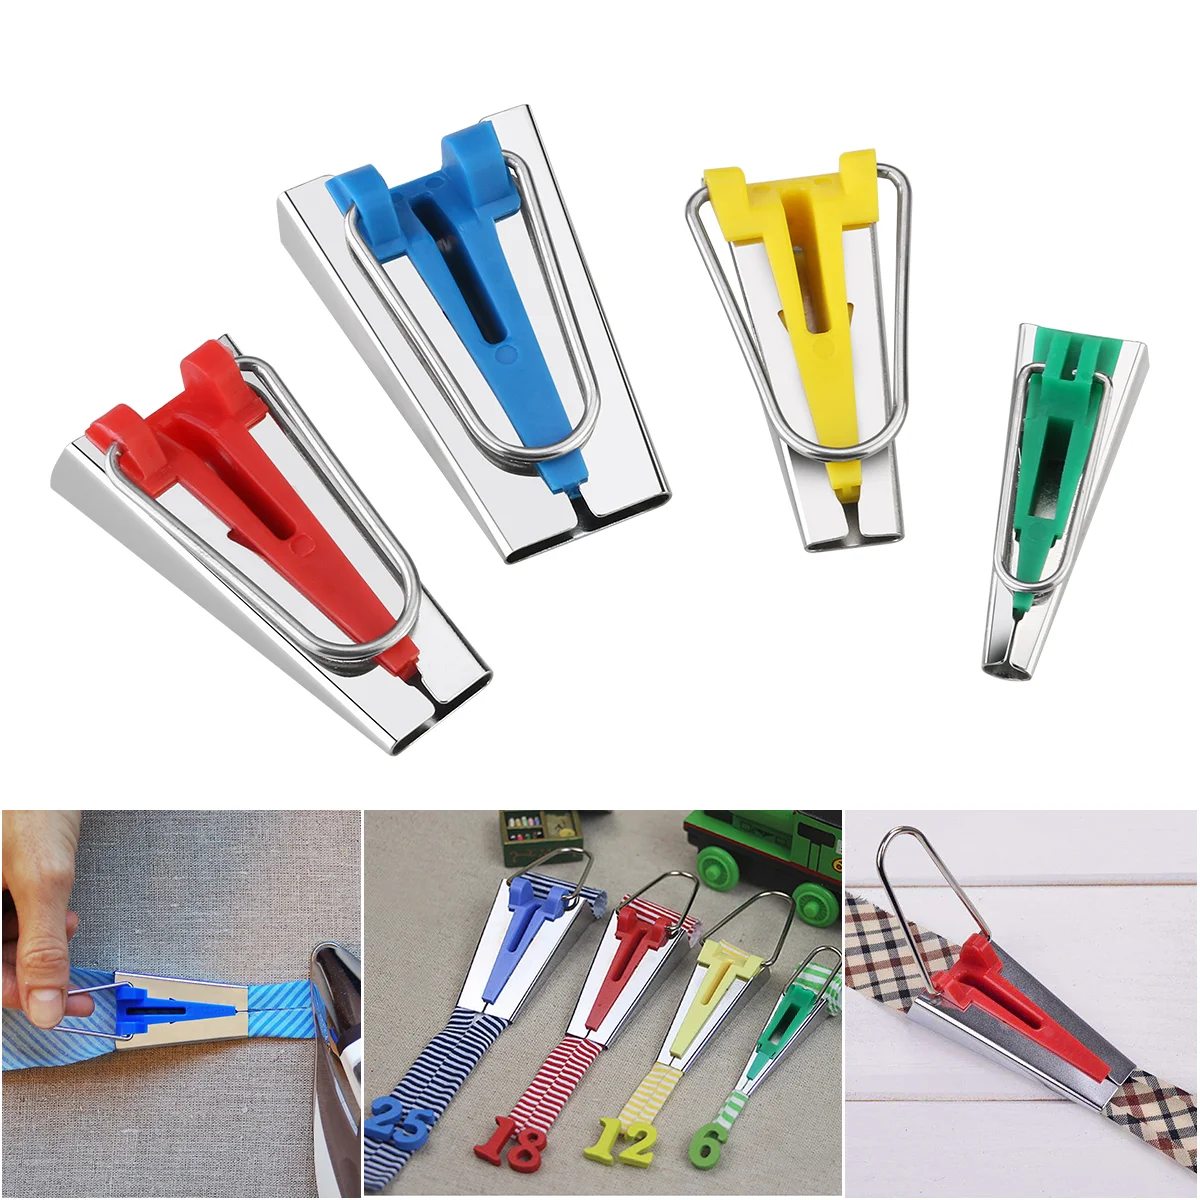 

6mm 12mm 18mm 25mm 4 Sizes Reusable Portable Fabric Bias Tape Makers Sewing Quilting Tools Binding Tools for Sartorius